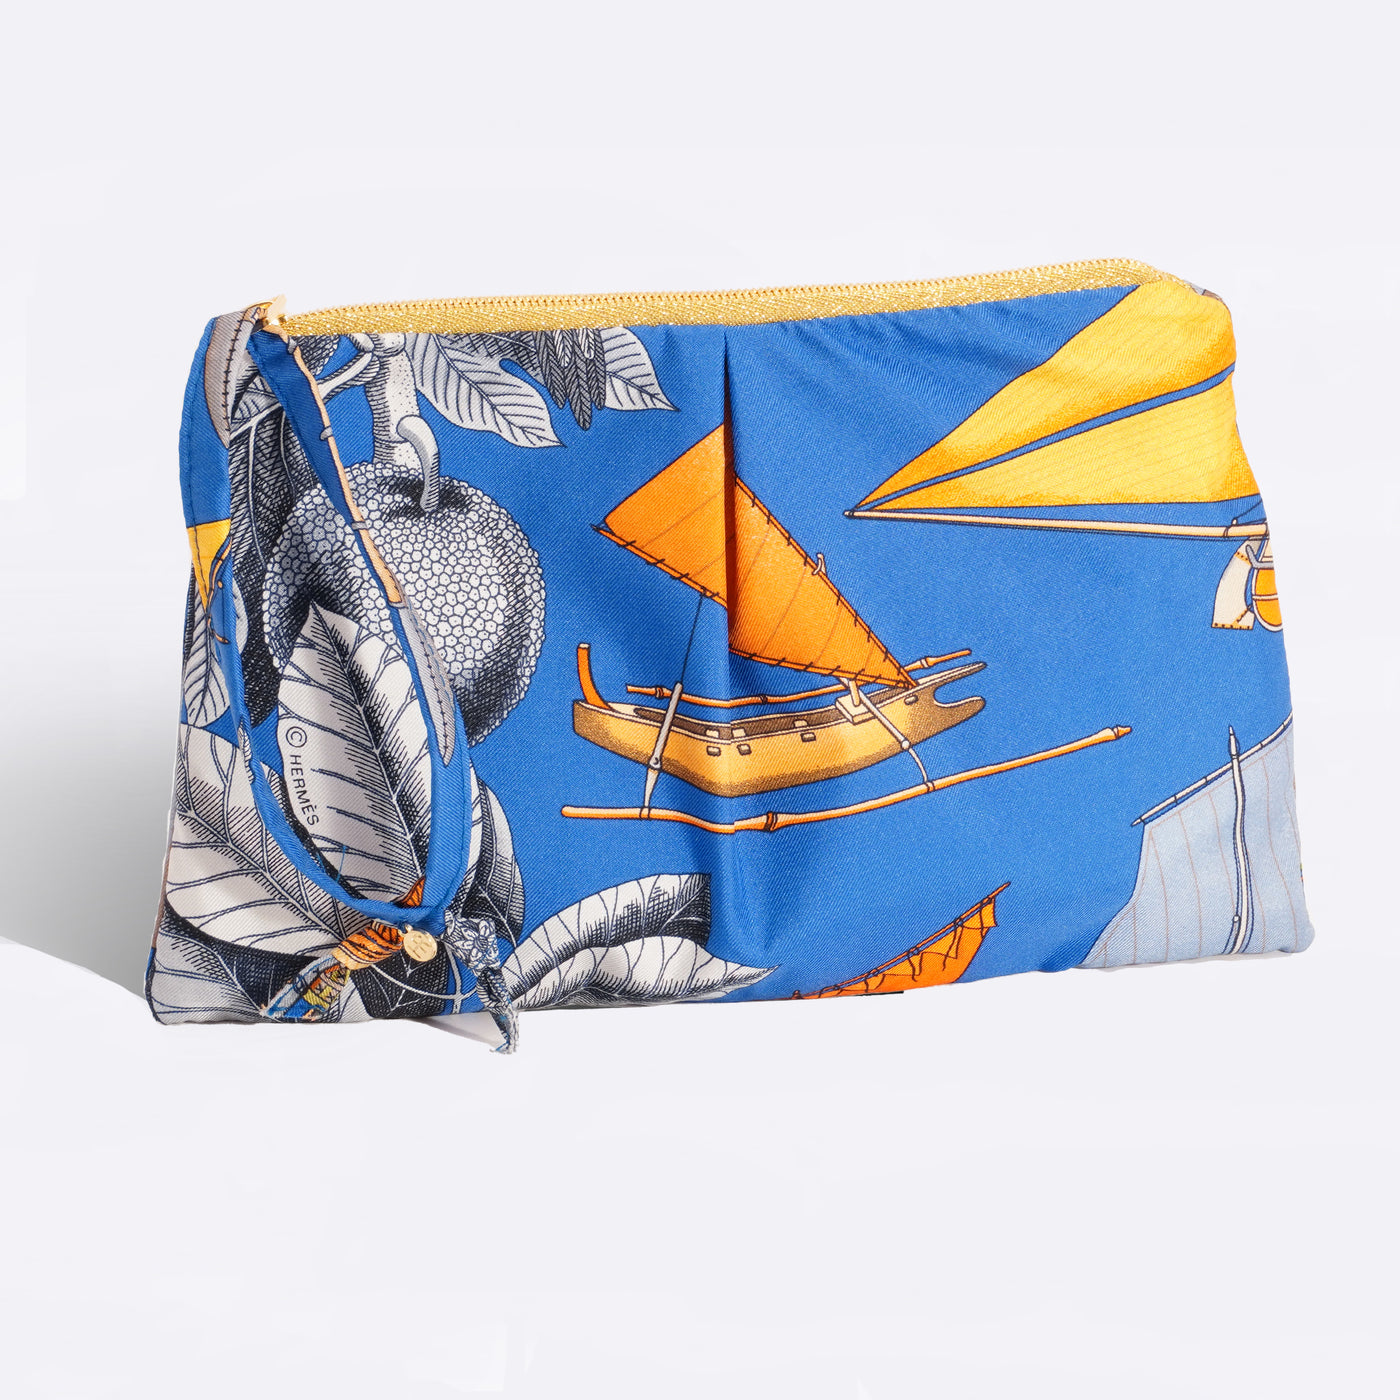 "Tout les Bateaux du Monde" Scarf Bag (Upcycled from Hermes Scarf) Party Clutch Hampton Road Designs   